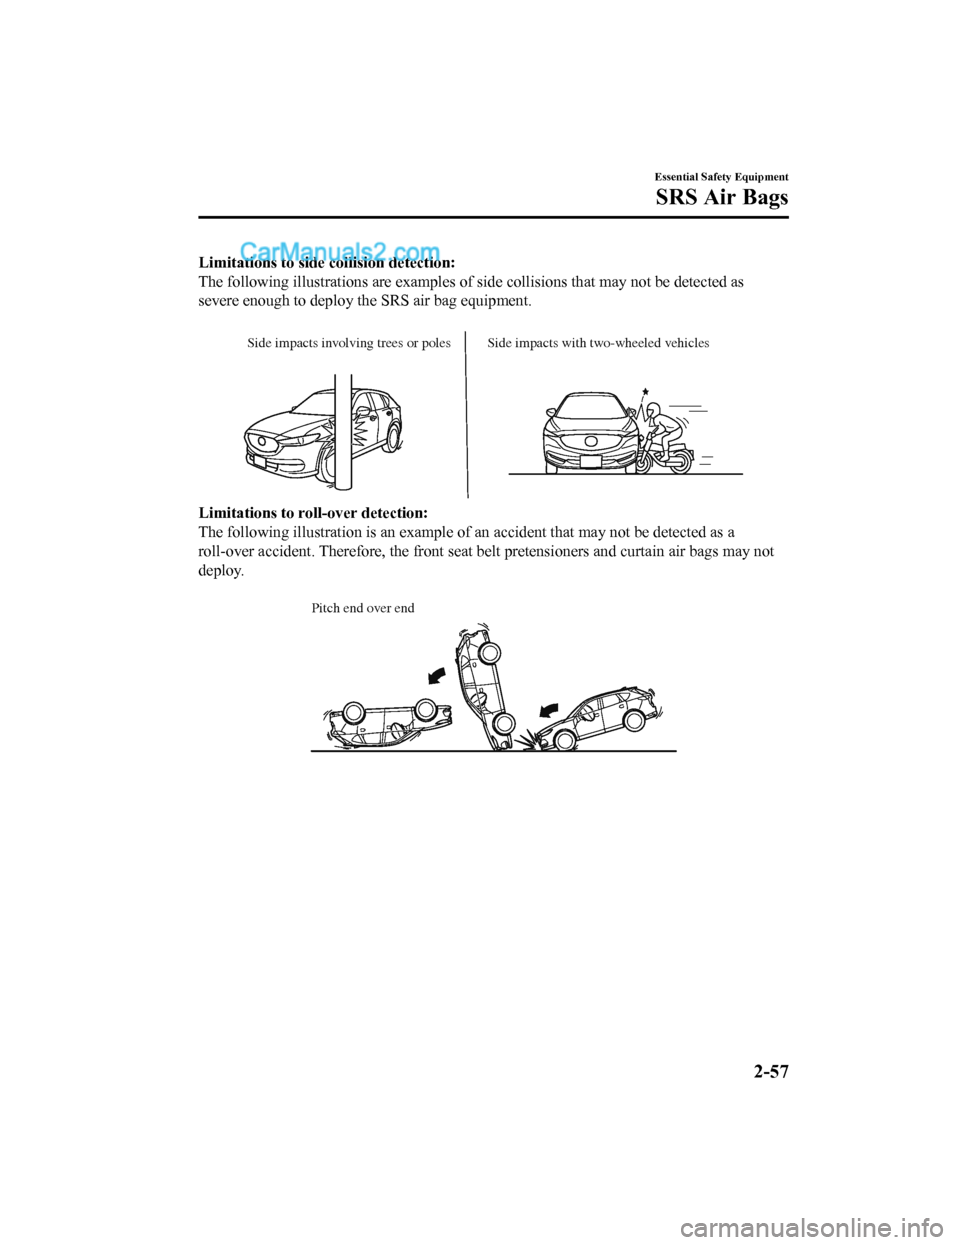 MAZDA MODEL CX-5 2018  Owners Manual (in English) Limitations to side collision detection:
The following illustrations are  examples of side collisions that may not be detected as
severe enough to deploy the SRS air bag equipment.
 
Side impacts invo